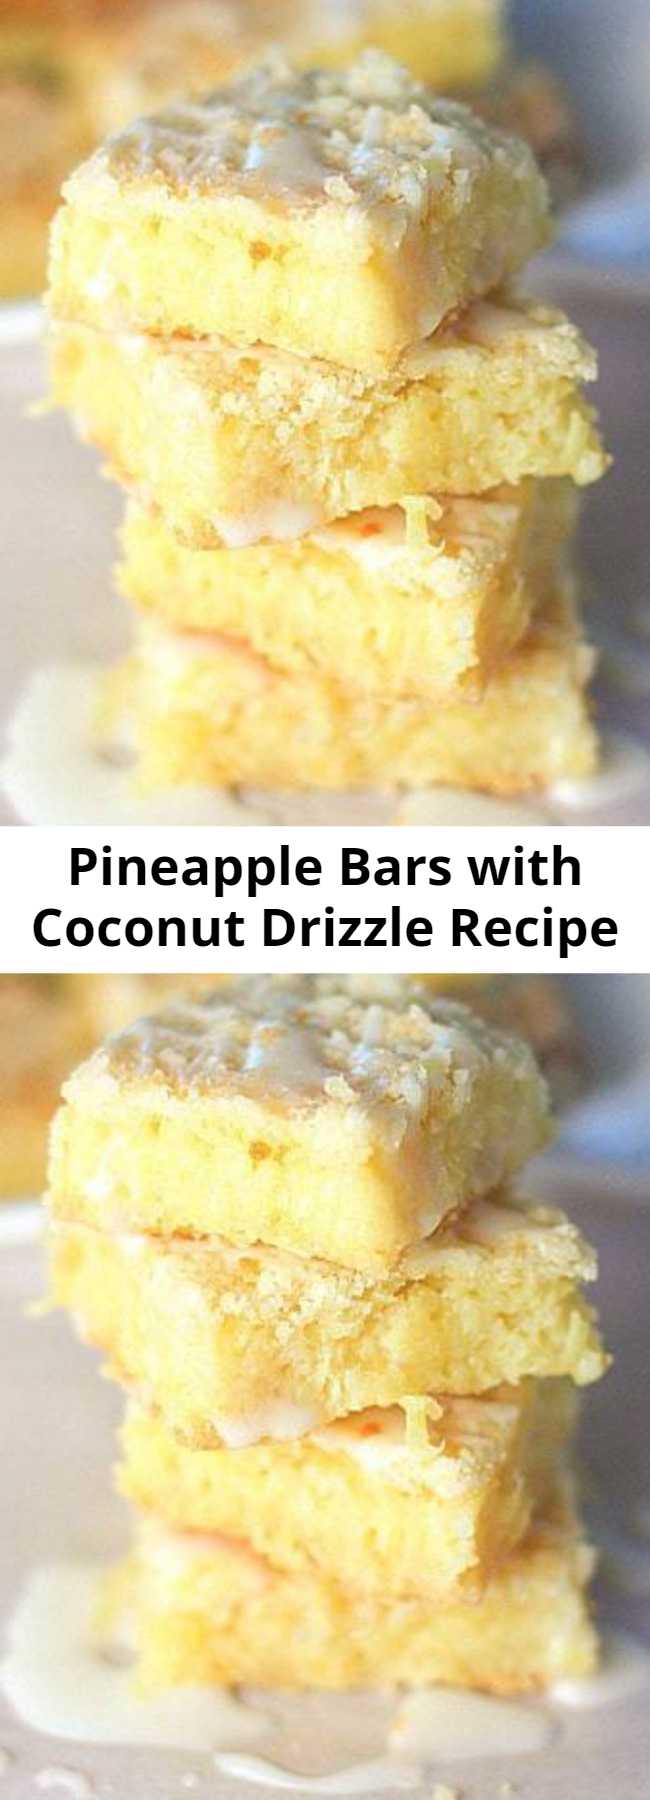 Easy Pineapple Bars with Coconut Drizzle Recipe - Only a few ingredients and super easy to make. I topped with optional Coconut Drizzle...they are good with or without!